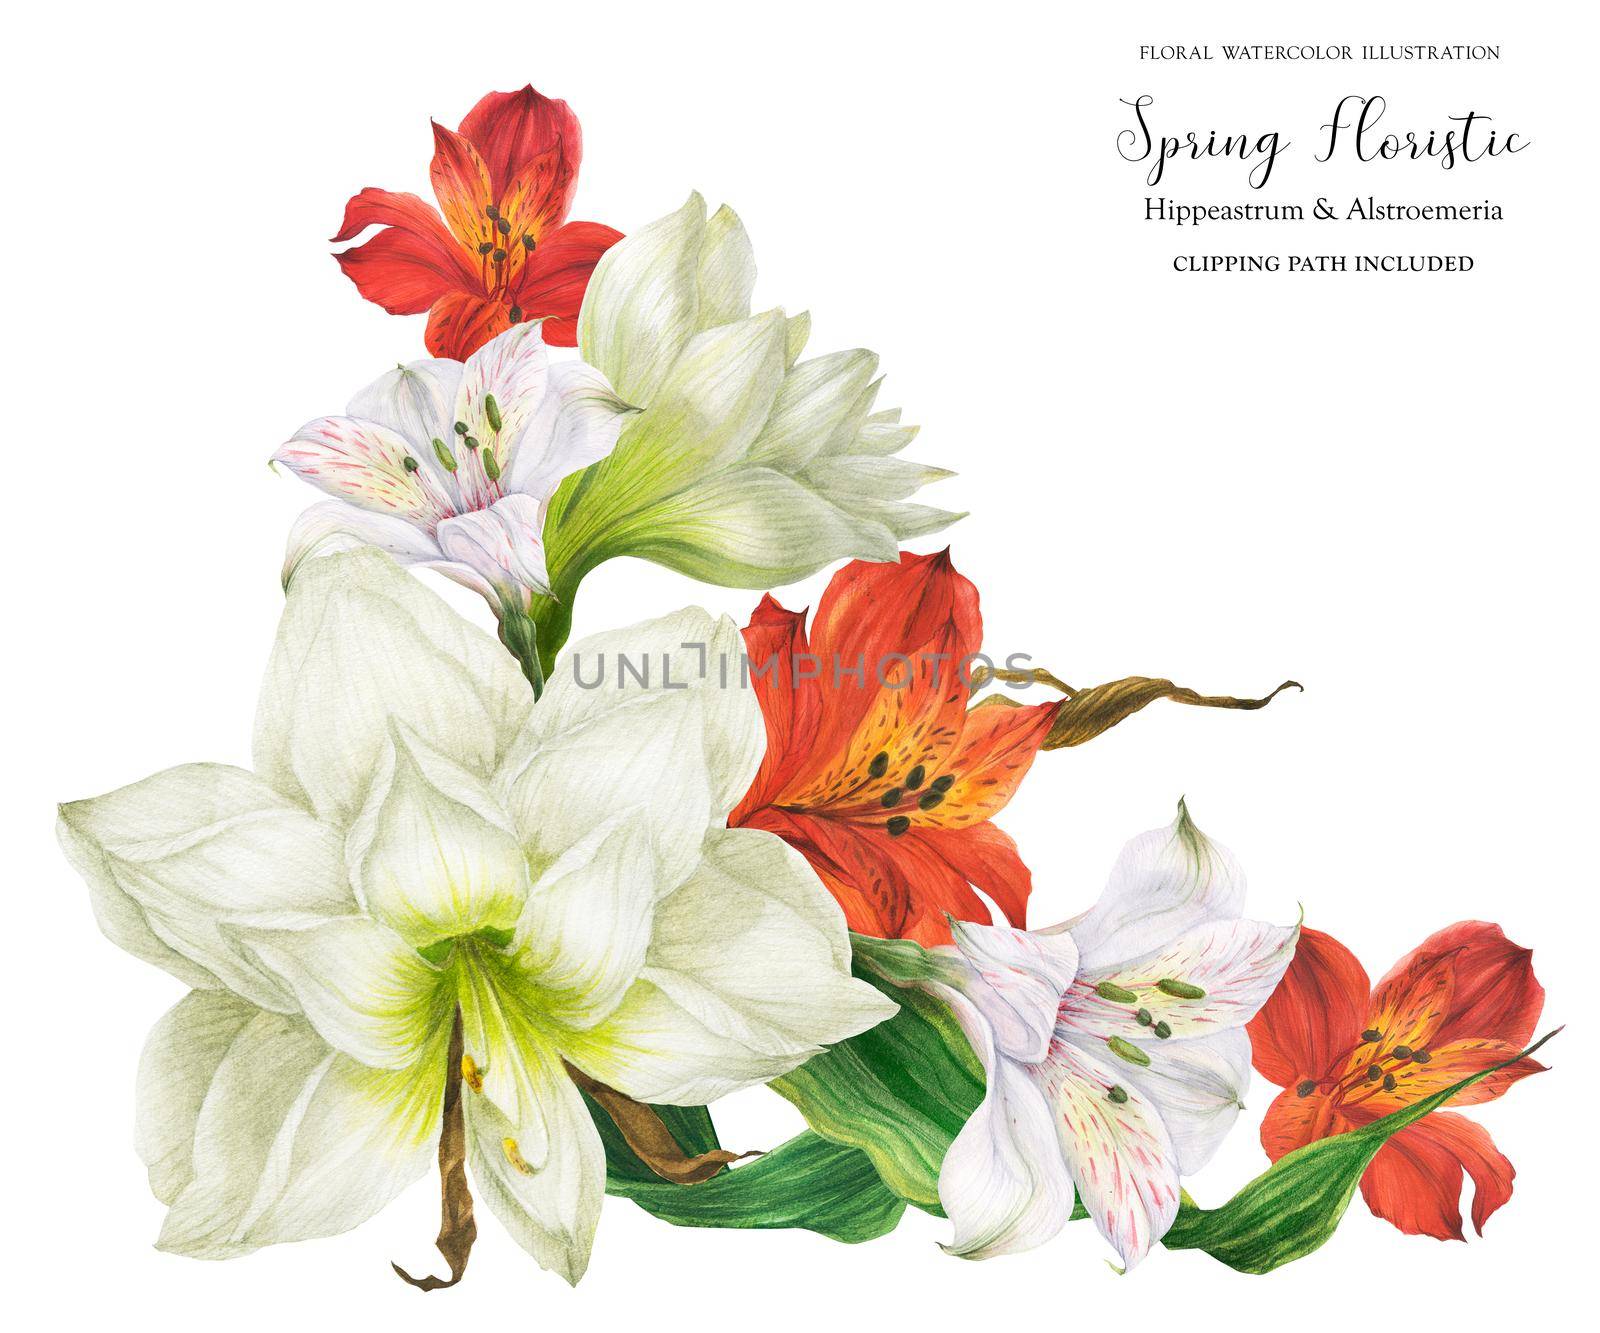 Bridal corsage bouquet with red and white lily flowers, realistic watercolor illustration with clipping path